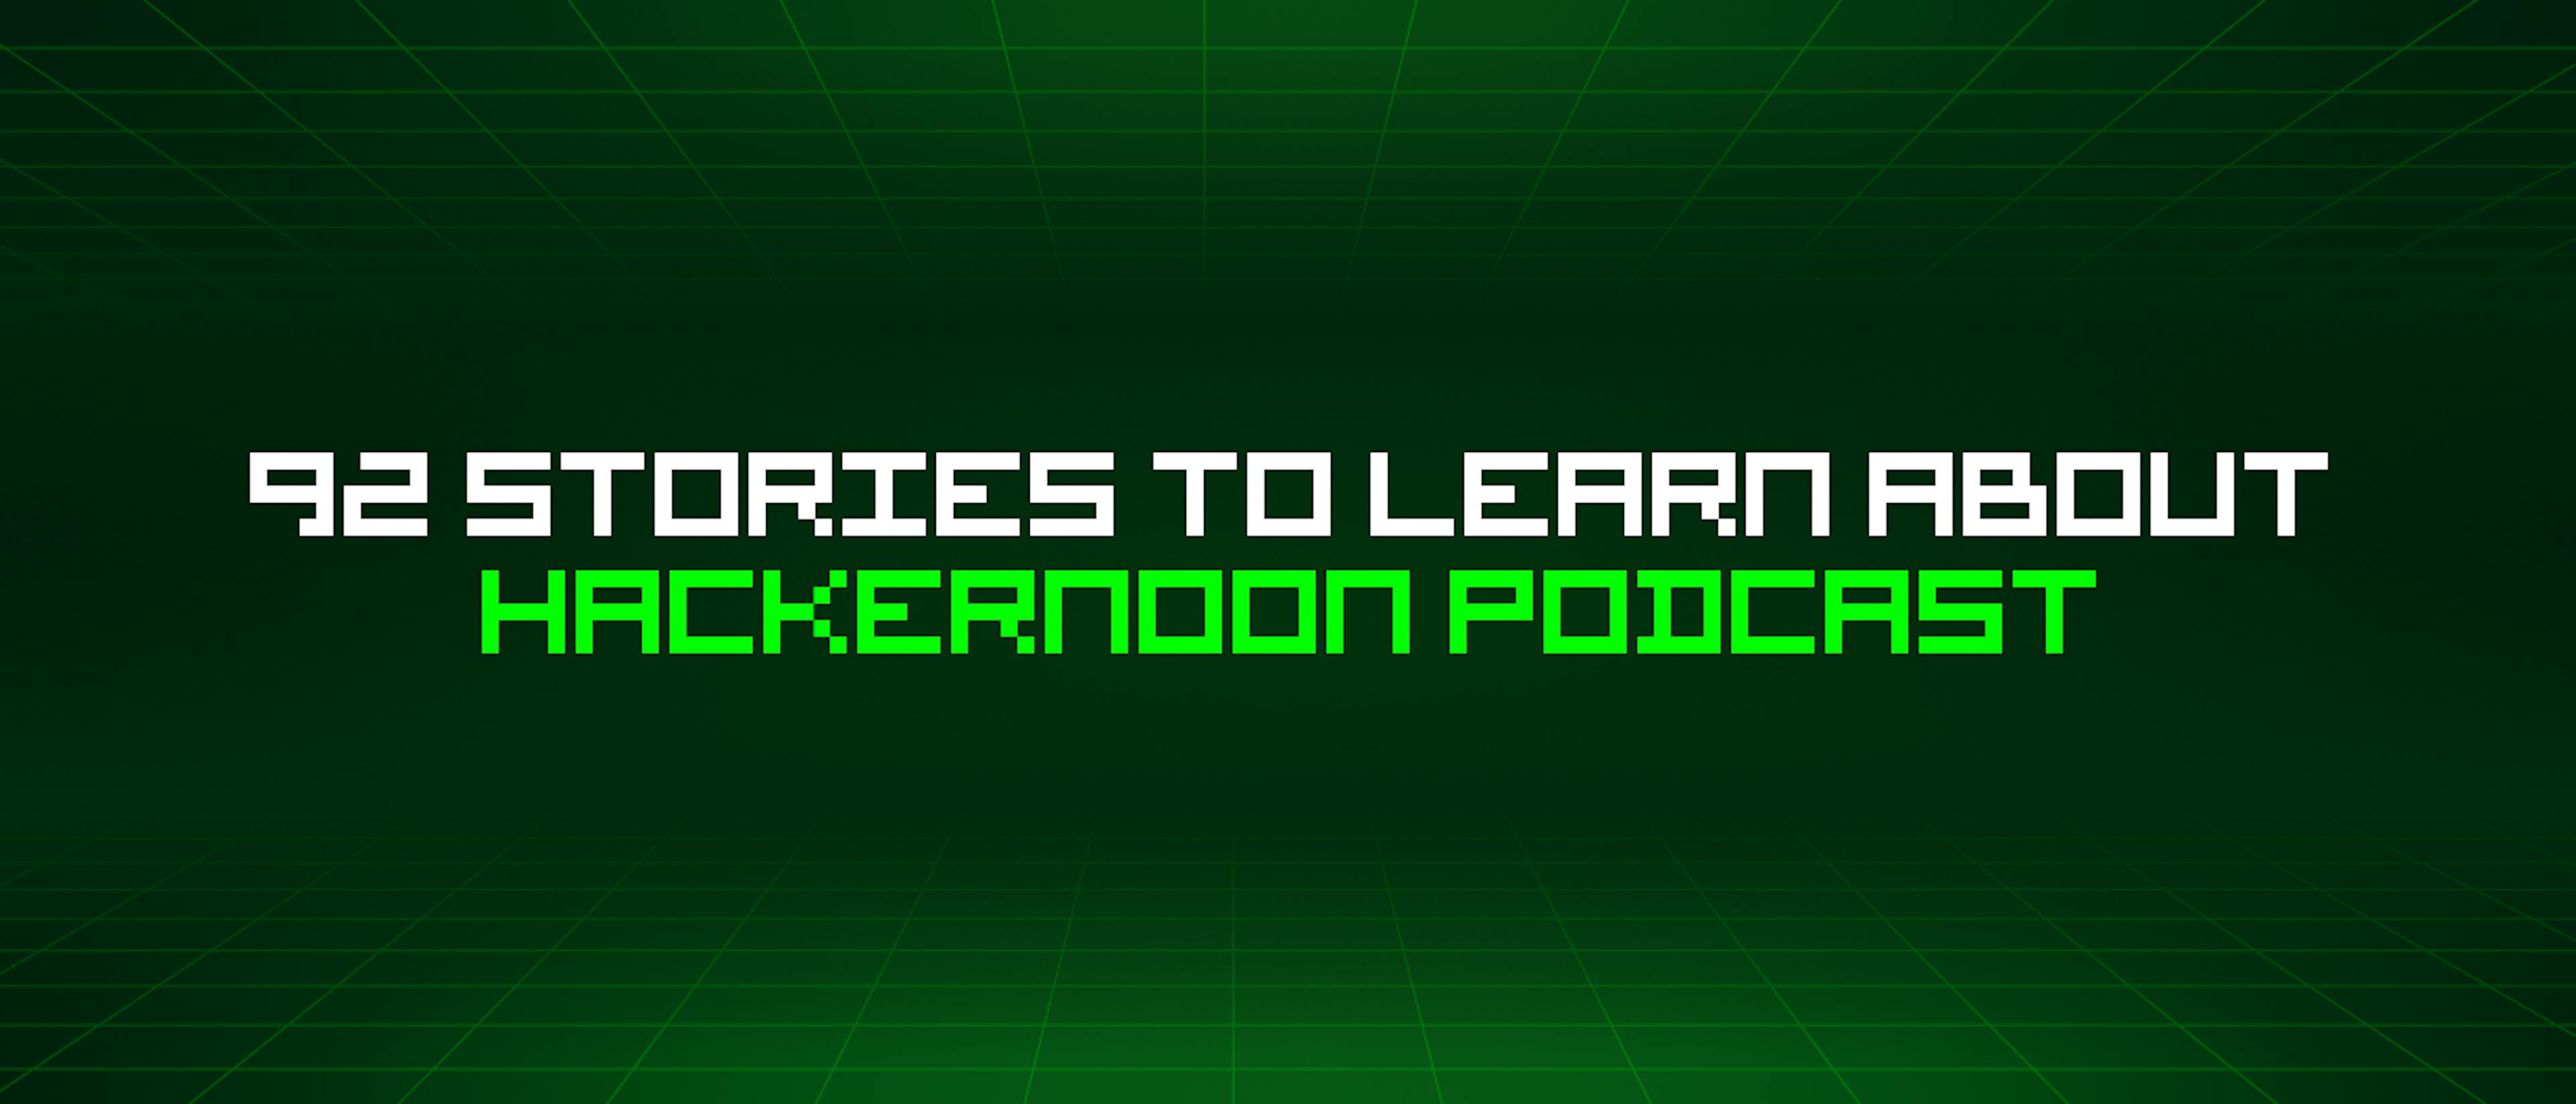 featured image - 92 Stories To Learn About Hackernoon Podcast